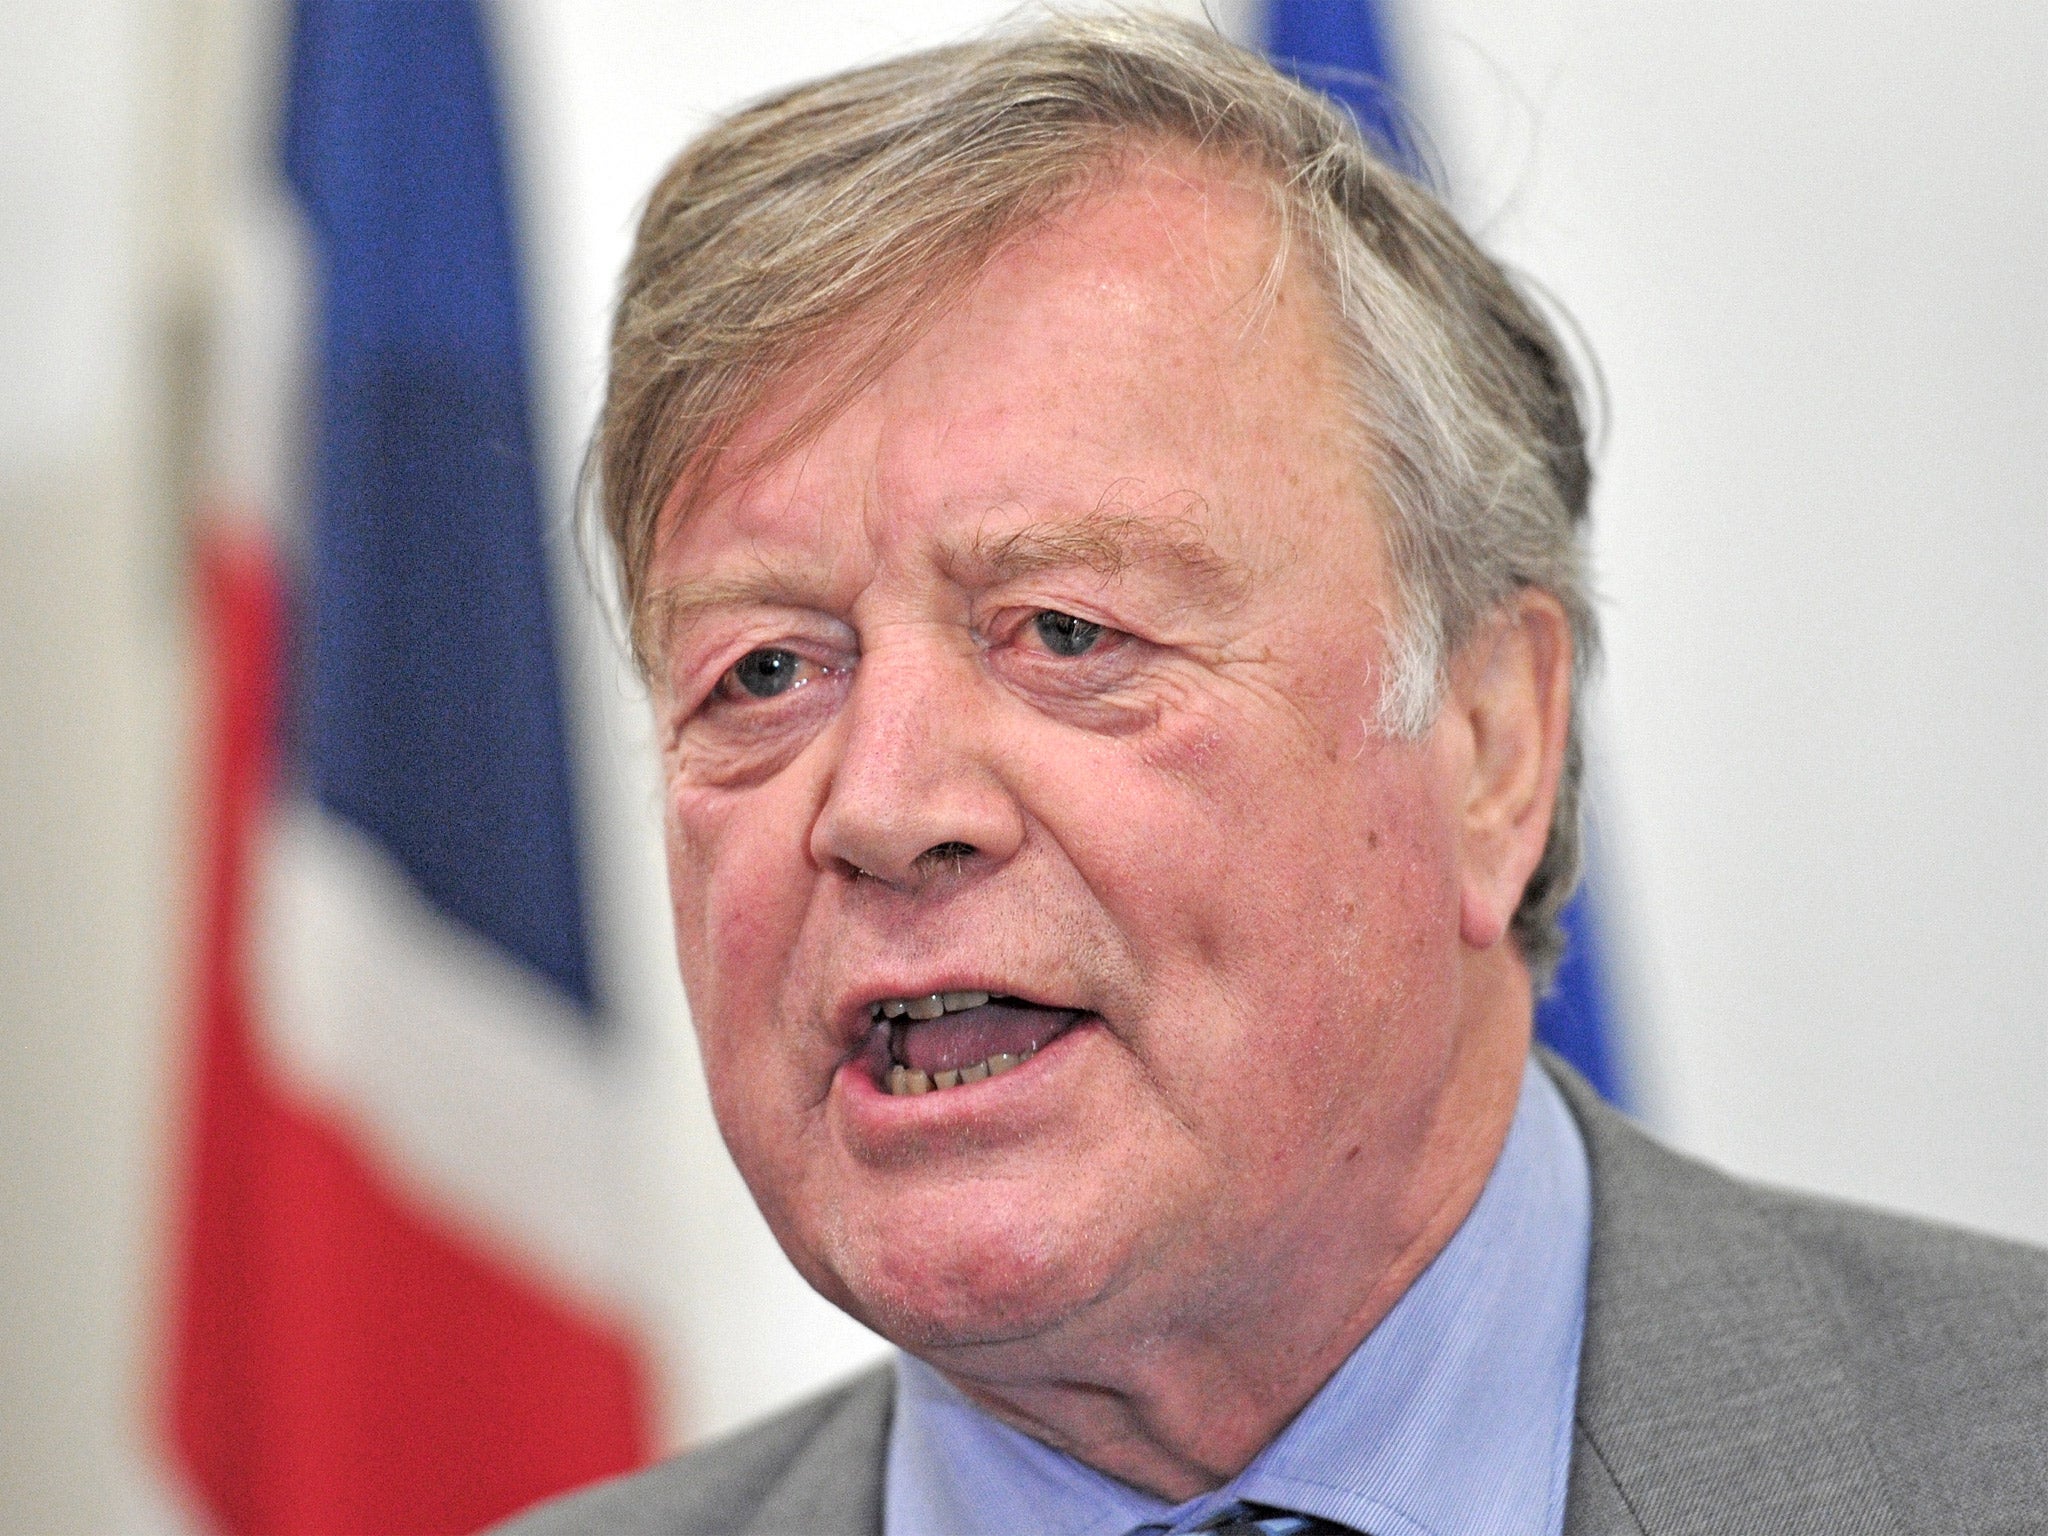 Kenneth Clarke renewed his feud with Cabinet colleague Theresa May over human rights legislation today